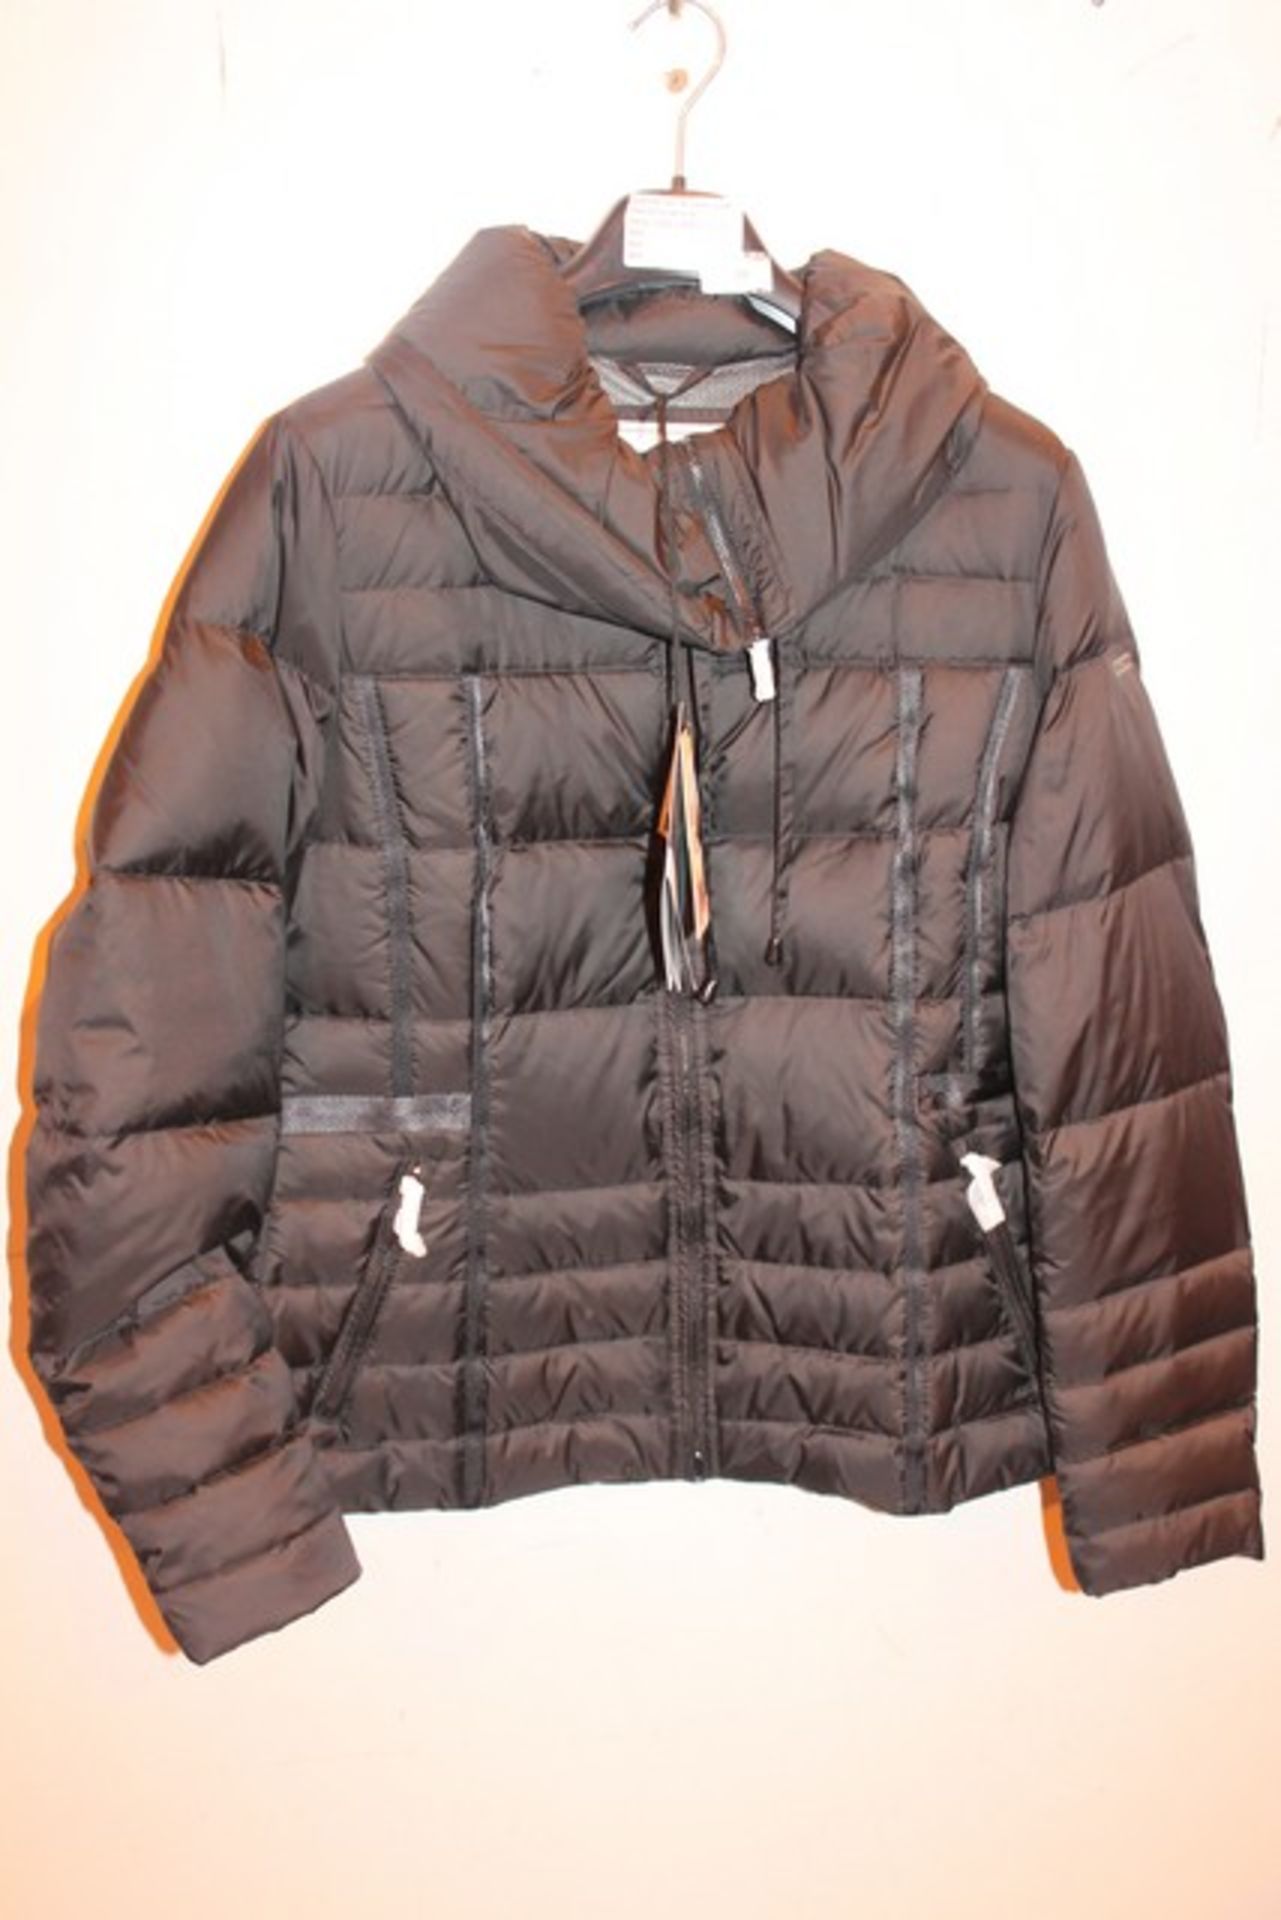 1 x GEOX RESPIRA WOMAN BLACK DOWN JACKET RRP £175 (CAGE 12.008)  *PLEASE NOTE THAT THE BID PRICE